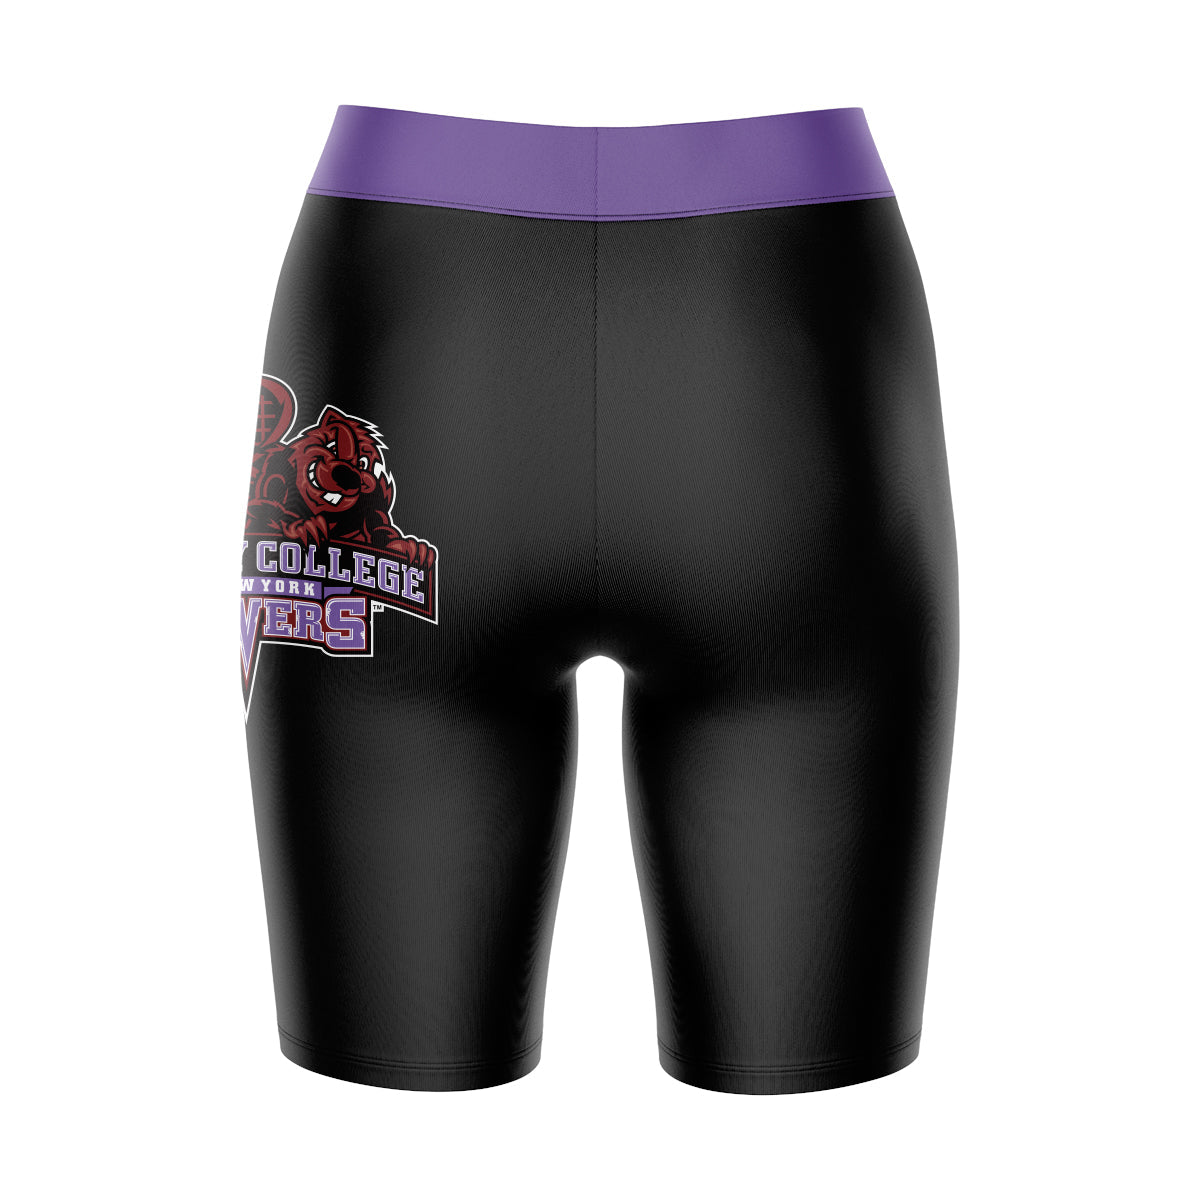 City College of New York Beavers Vive La Fete Logo on Thigh and Waistband Black and Purple Women Bike Short 9 Inseam